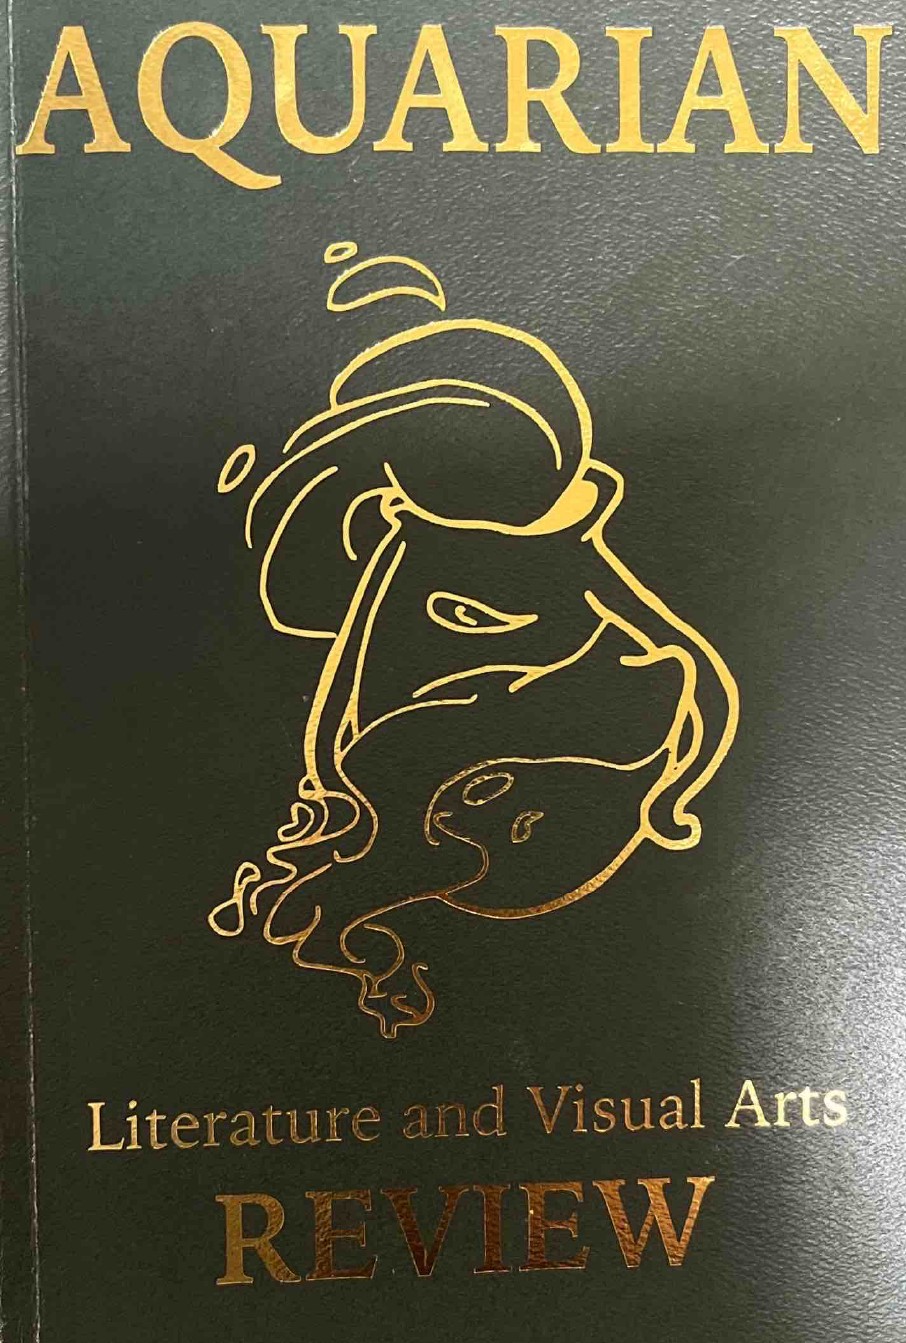 The 2019 cover. It is solid green with shiny gold details. The Title is: Aquarian Review. The subtitle is Literature and Visual Arts. In the center is a gold icon that is a water pitcher, with flowing water around it